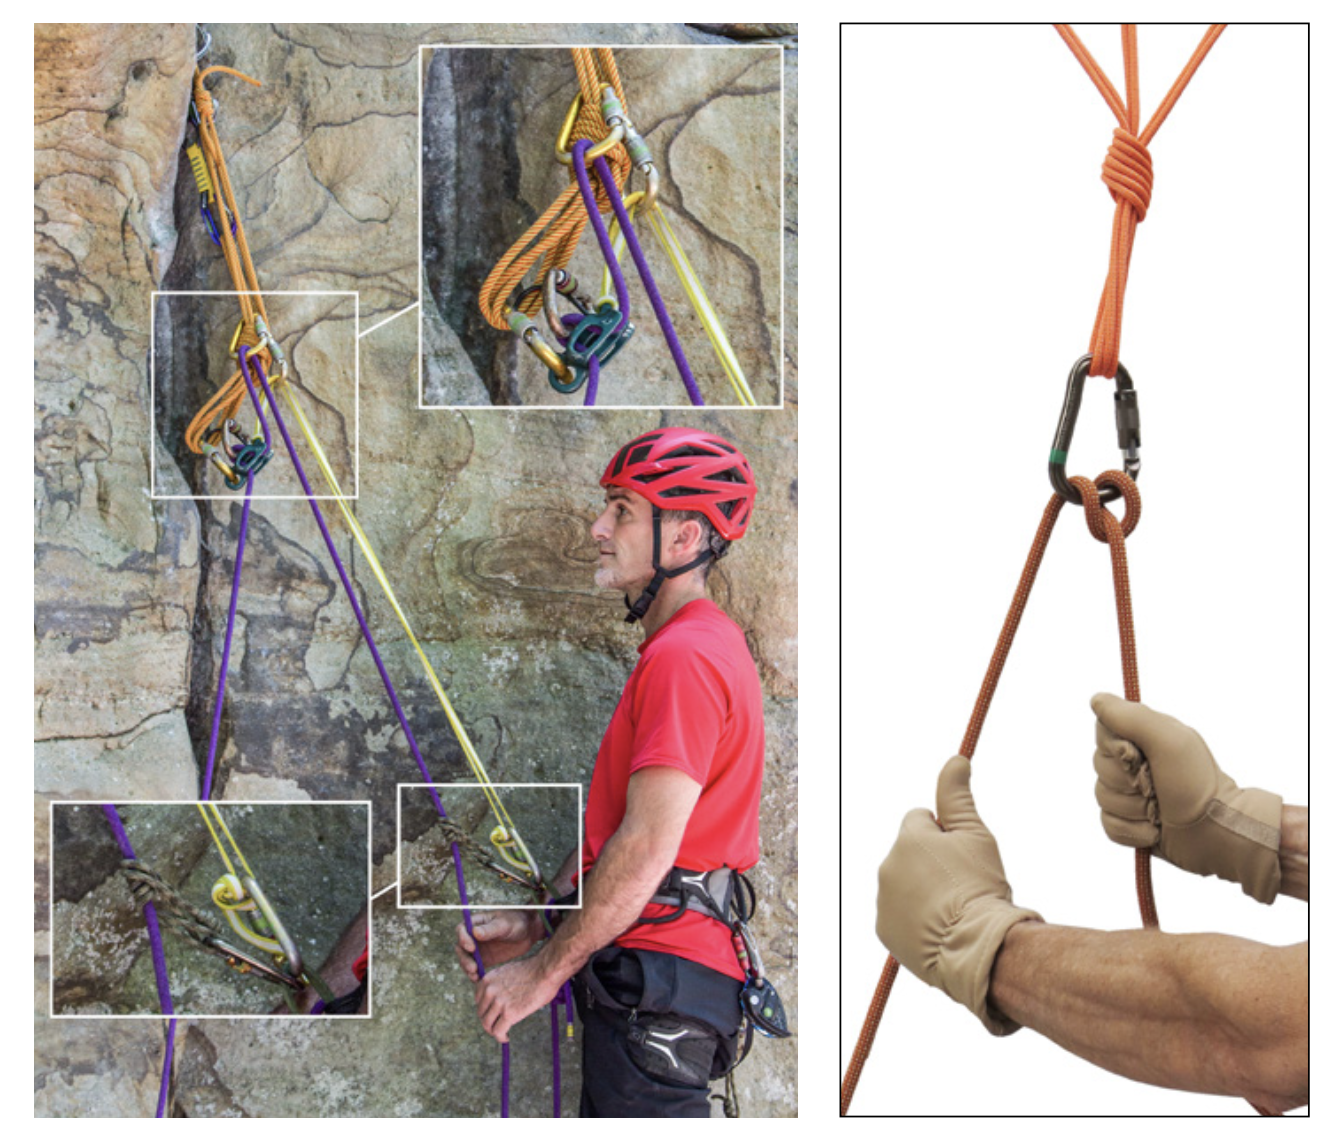 Accidents in North American Climbing — News — The American Alpine Club